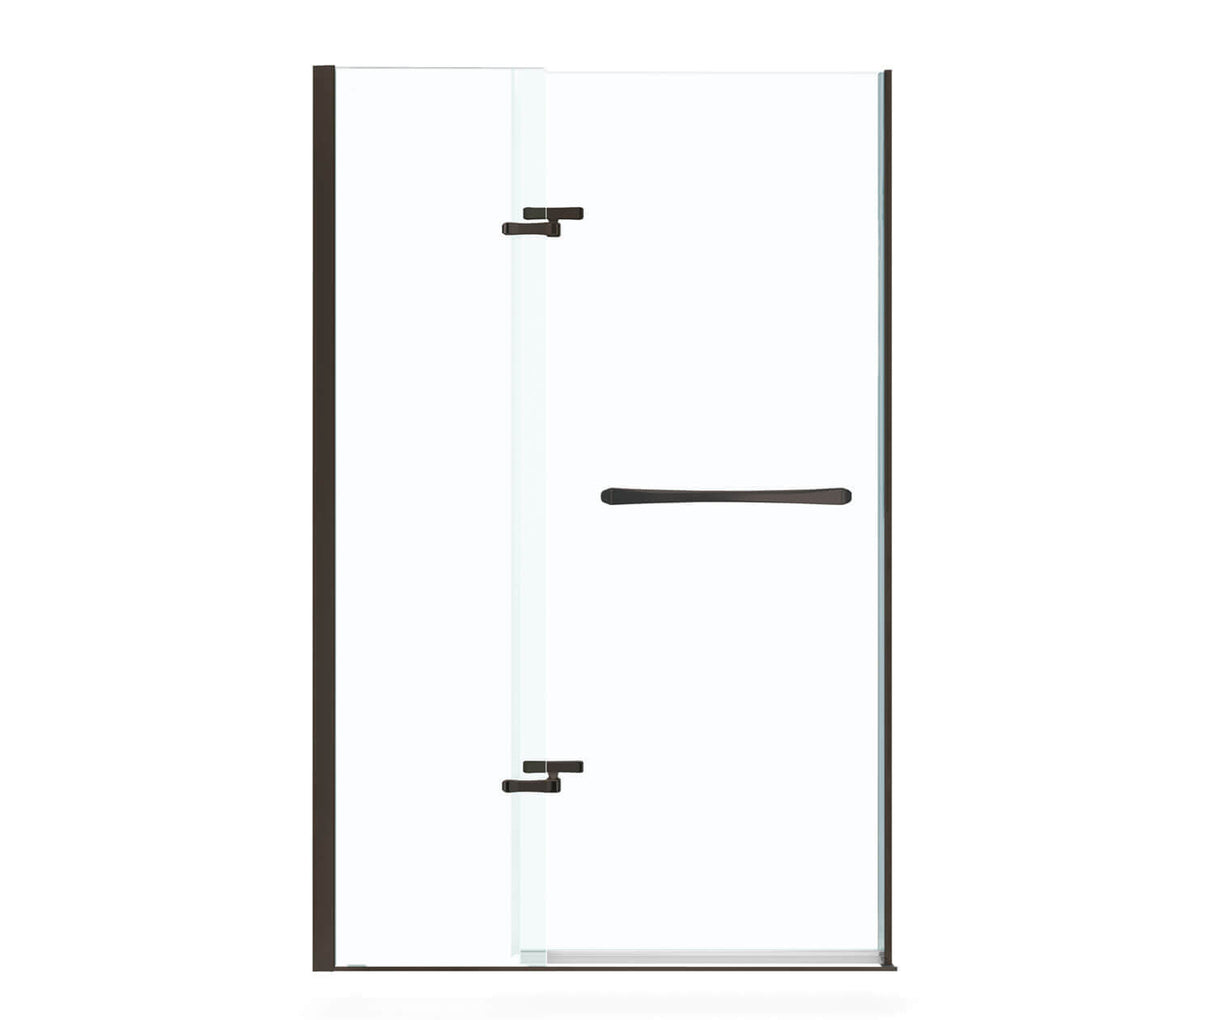 MAAX 136677-900-173-000 Reveal 71 41 ½-44 ½ x 71 ½ in. 8mm Pivot Shower Door for Alcove Installation with Clear glass in Dark Bronze